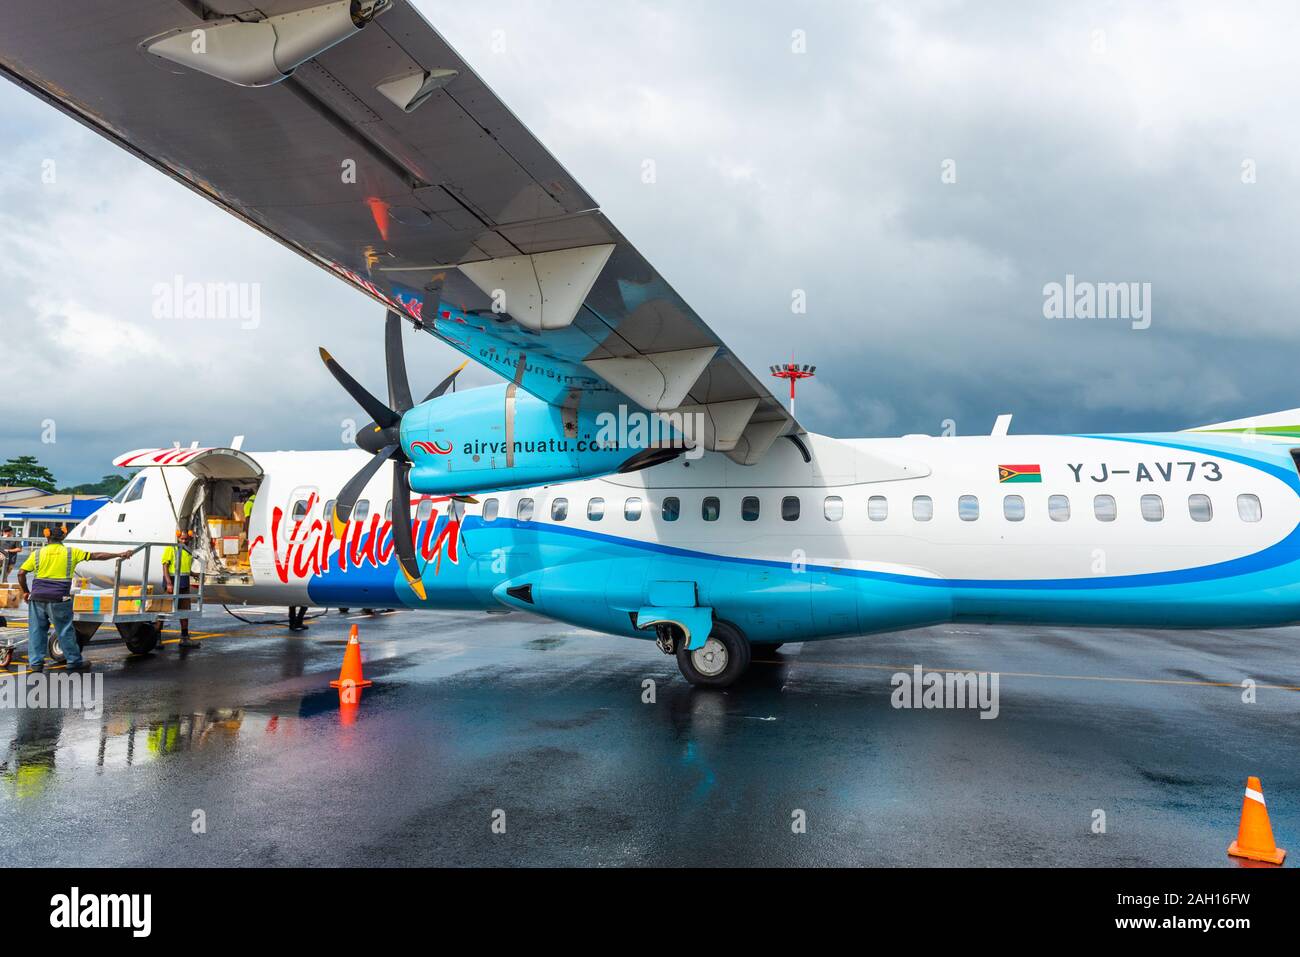 PORTVILA, VANUATU - JULY 19, 2019: Plane at the airport on a background of cloudy sky Stock Photo